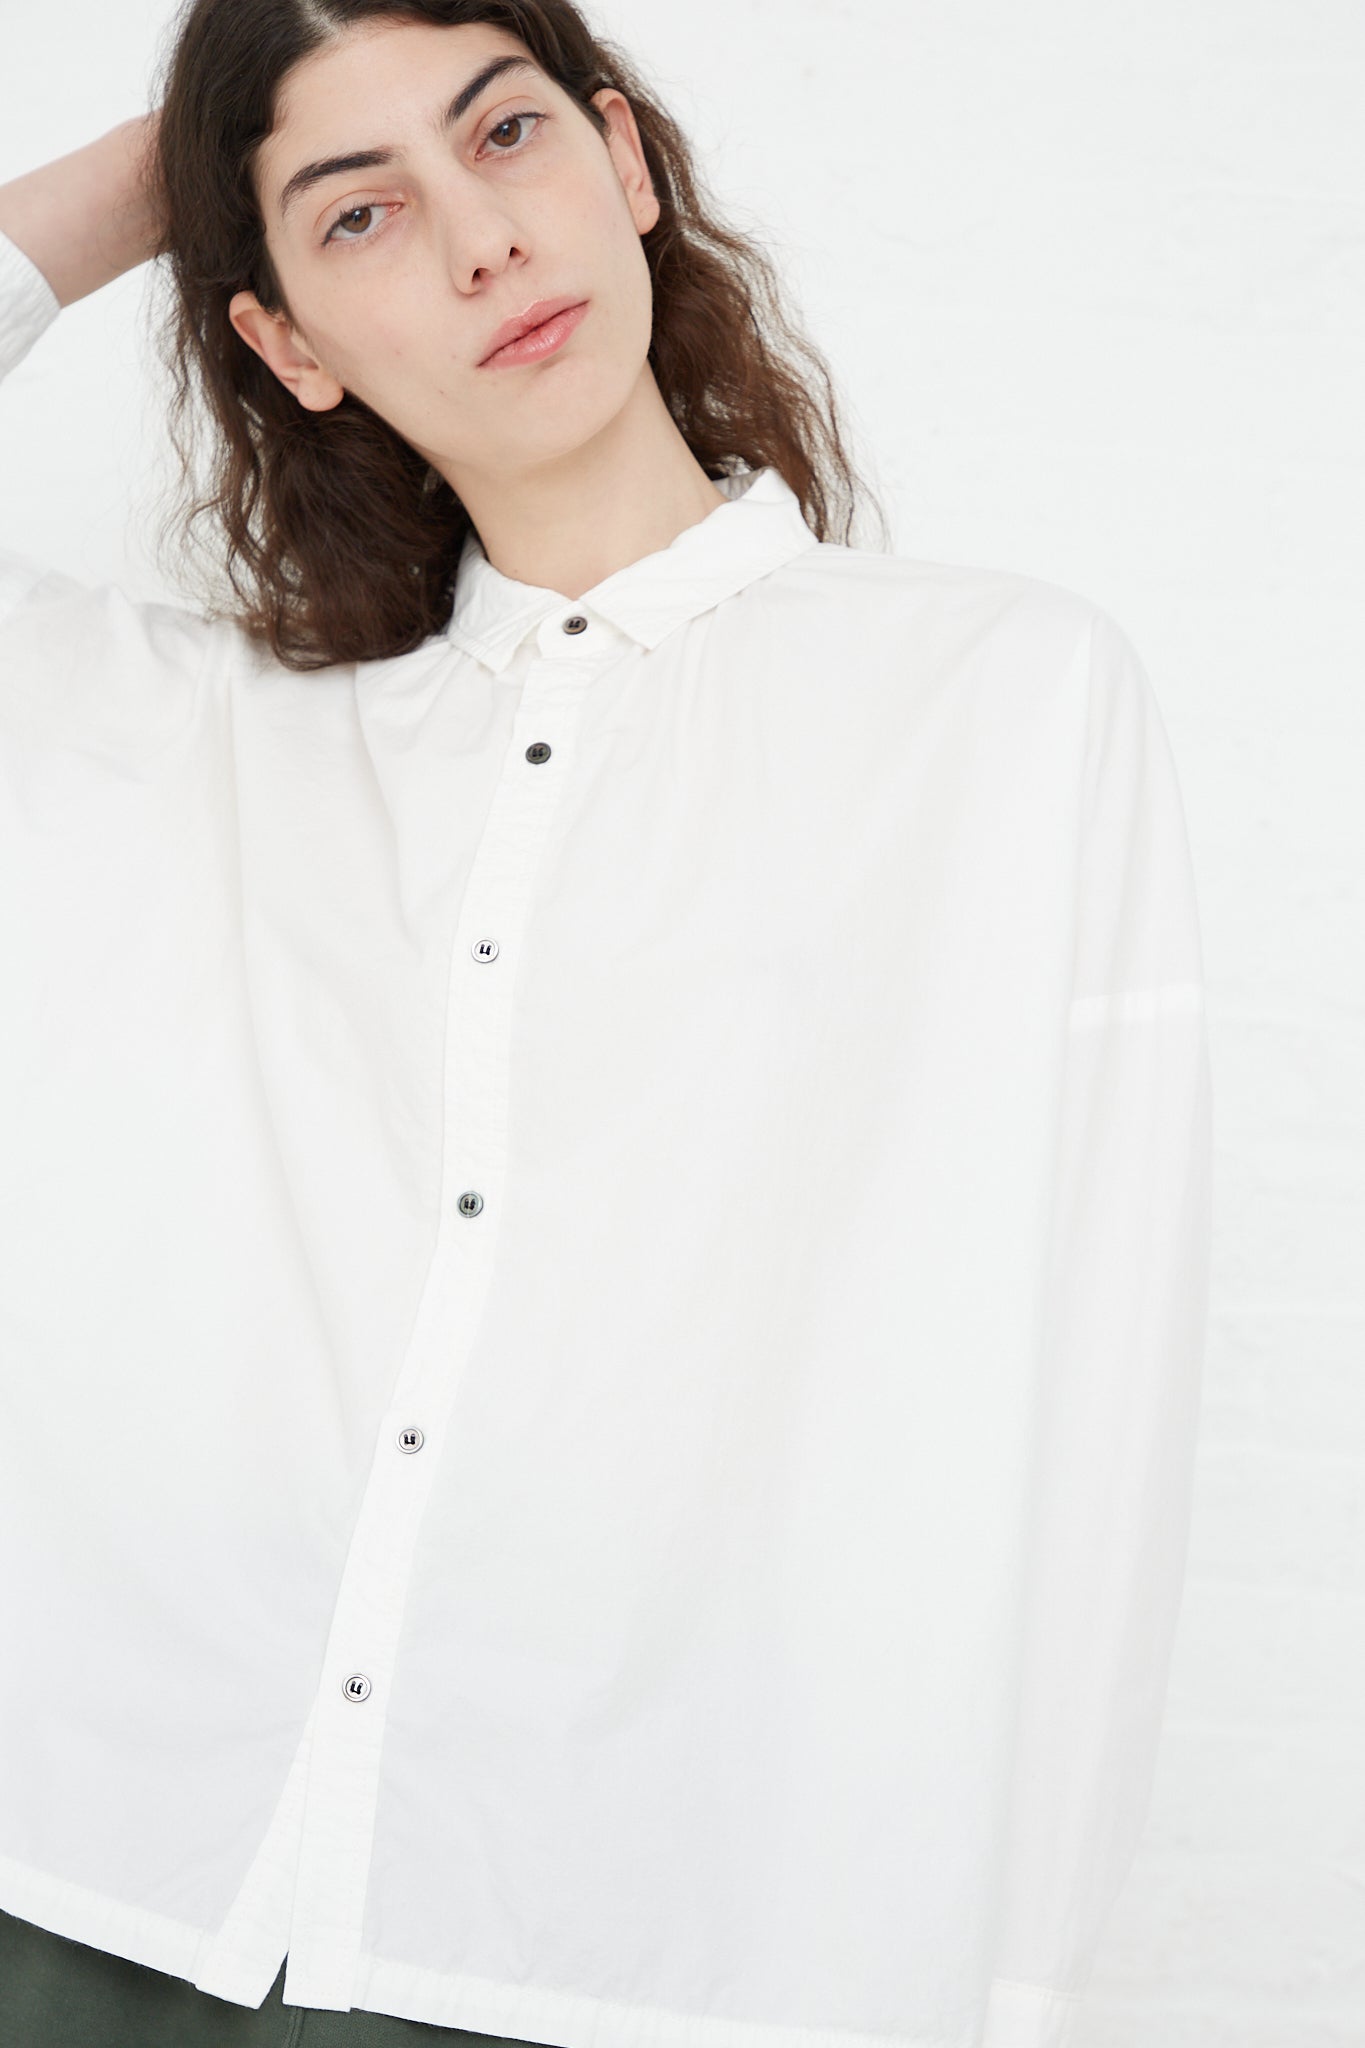 A model wearing a Woven Cotton Oumisarashi Shirt in White by Ichi Antiquités and green pants made of natural fibers.